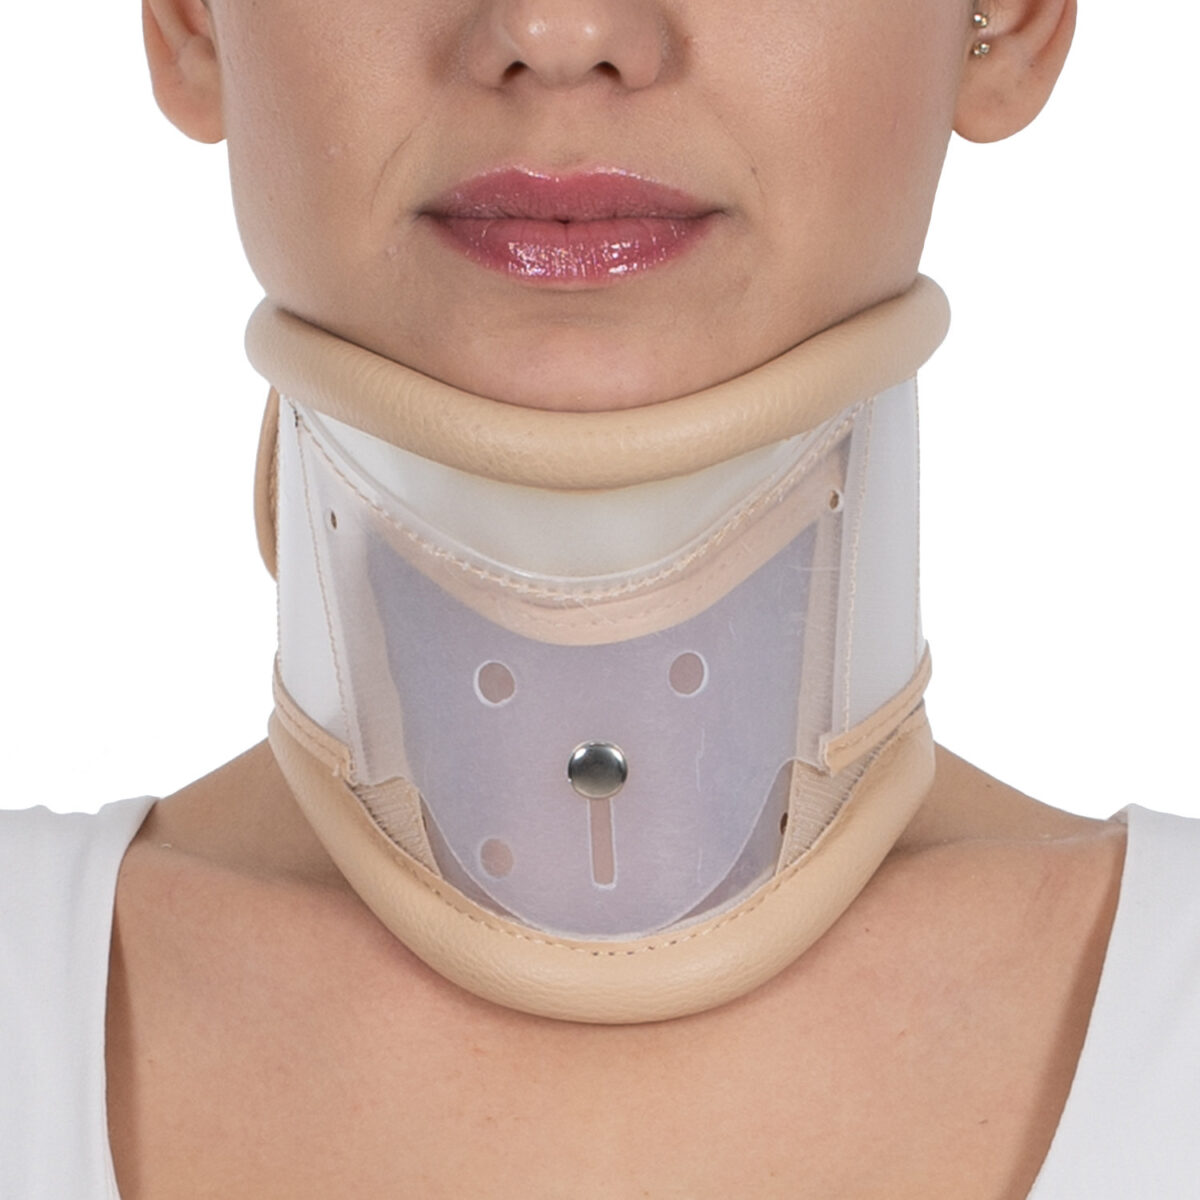 wingmed orthopedic equipments W107 adjustable pvc cervical collar with a chin support product 4 1